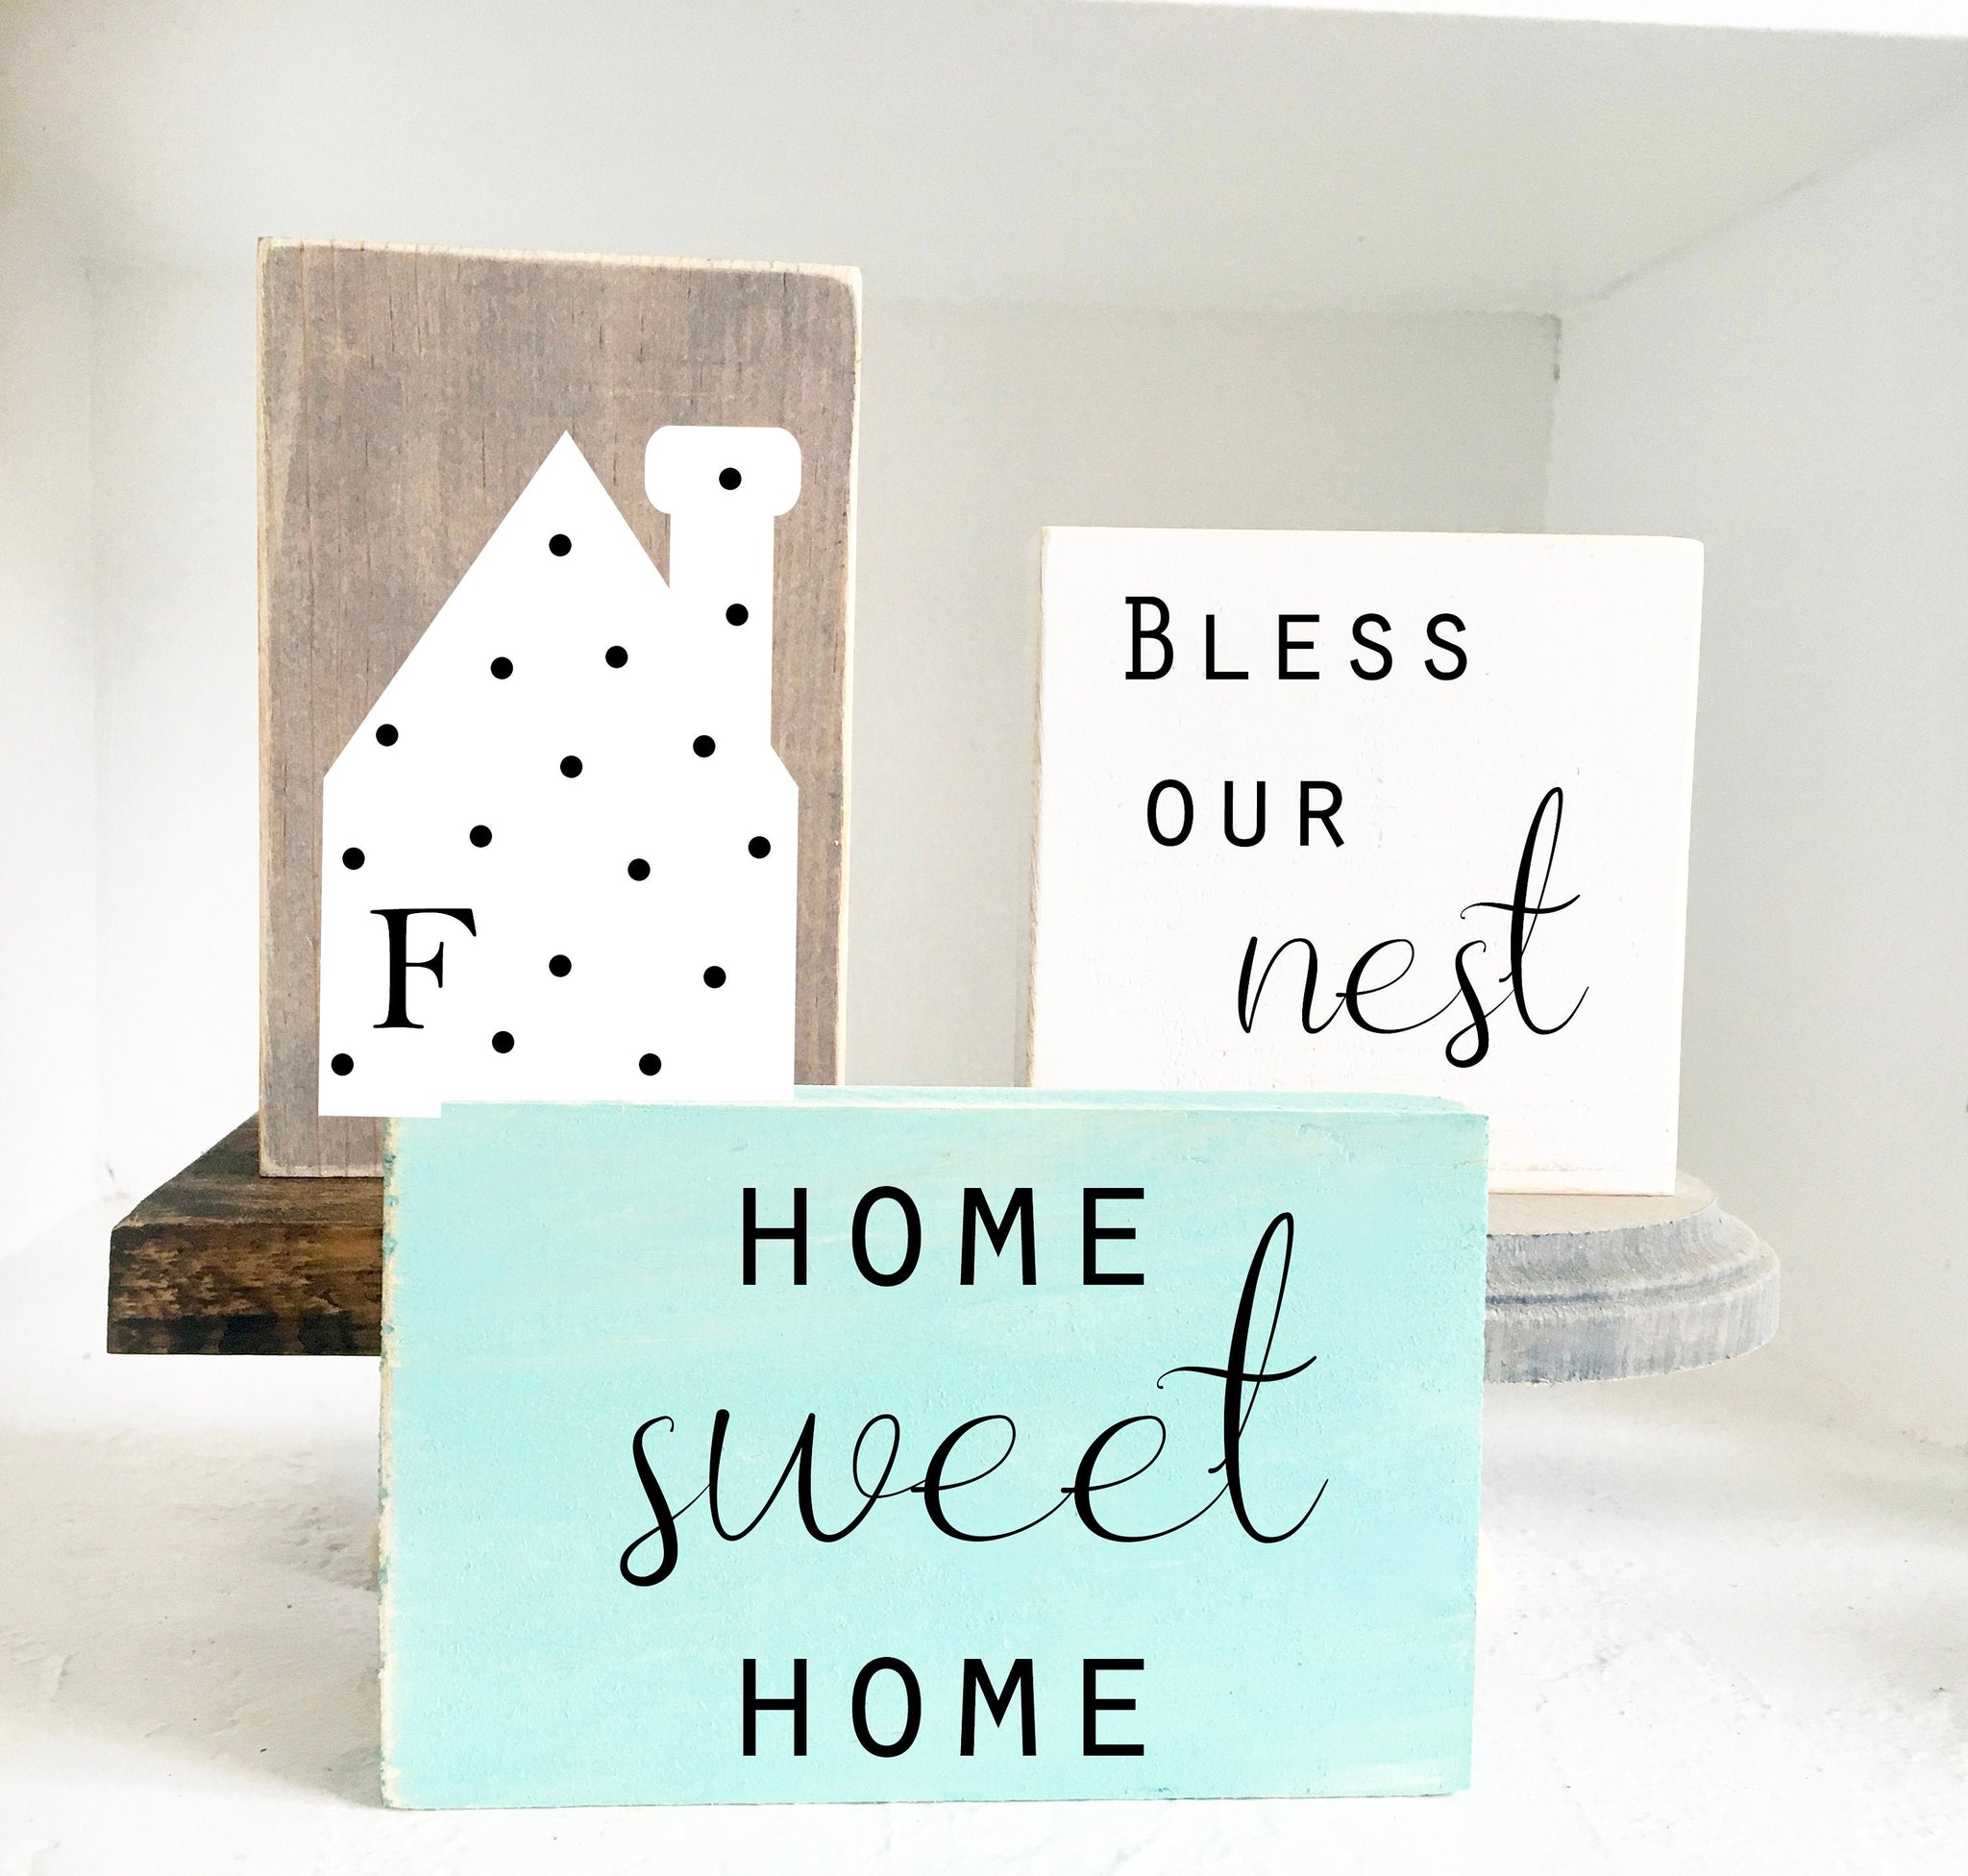 Personalized- Home sweet home- Tiered tray signs- Coffee bar decor- wooden sign- Home decor- Housewarming gift- Farmhouse- Bless our nest